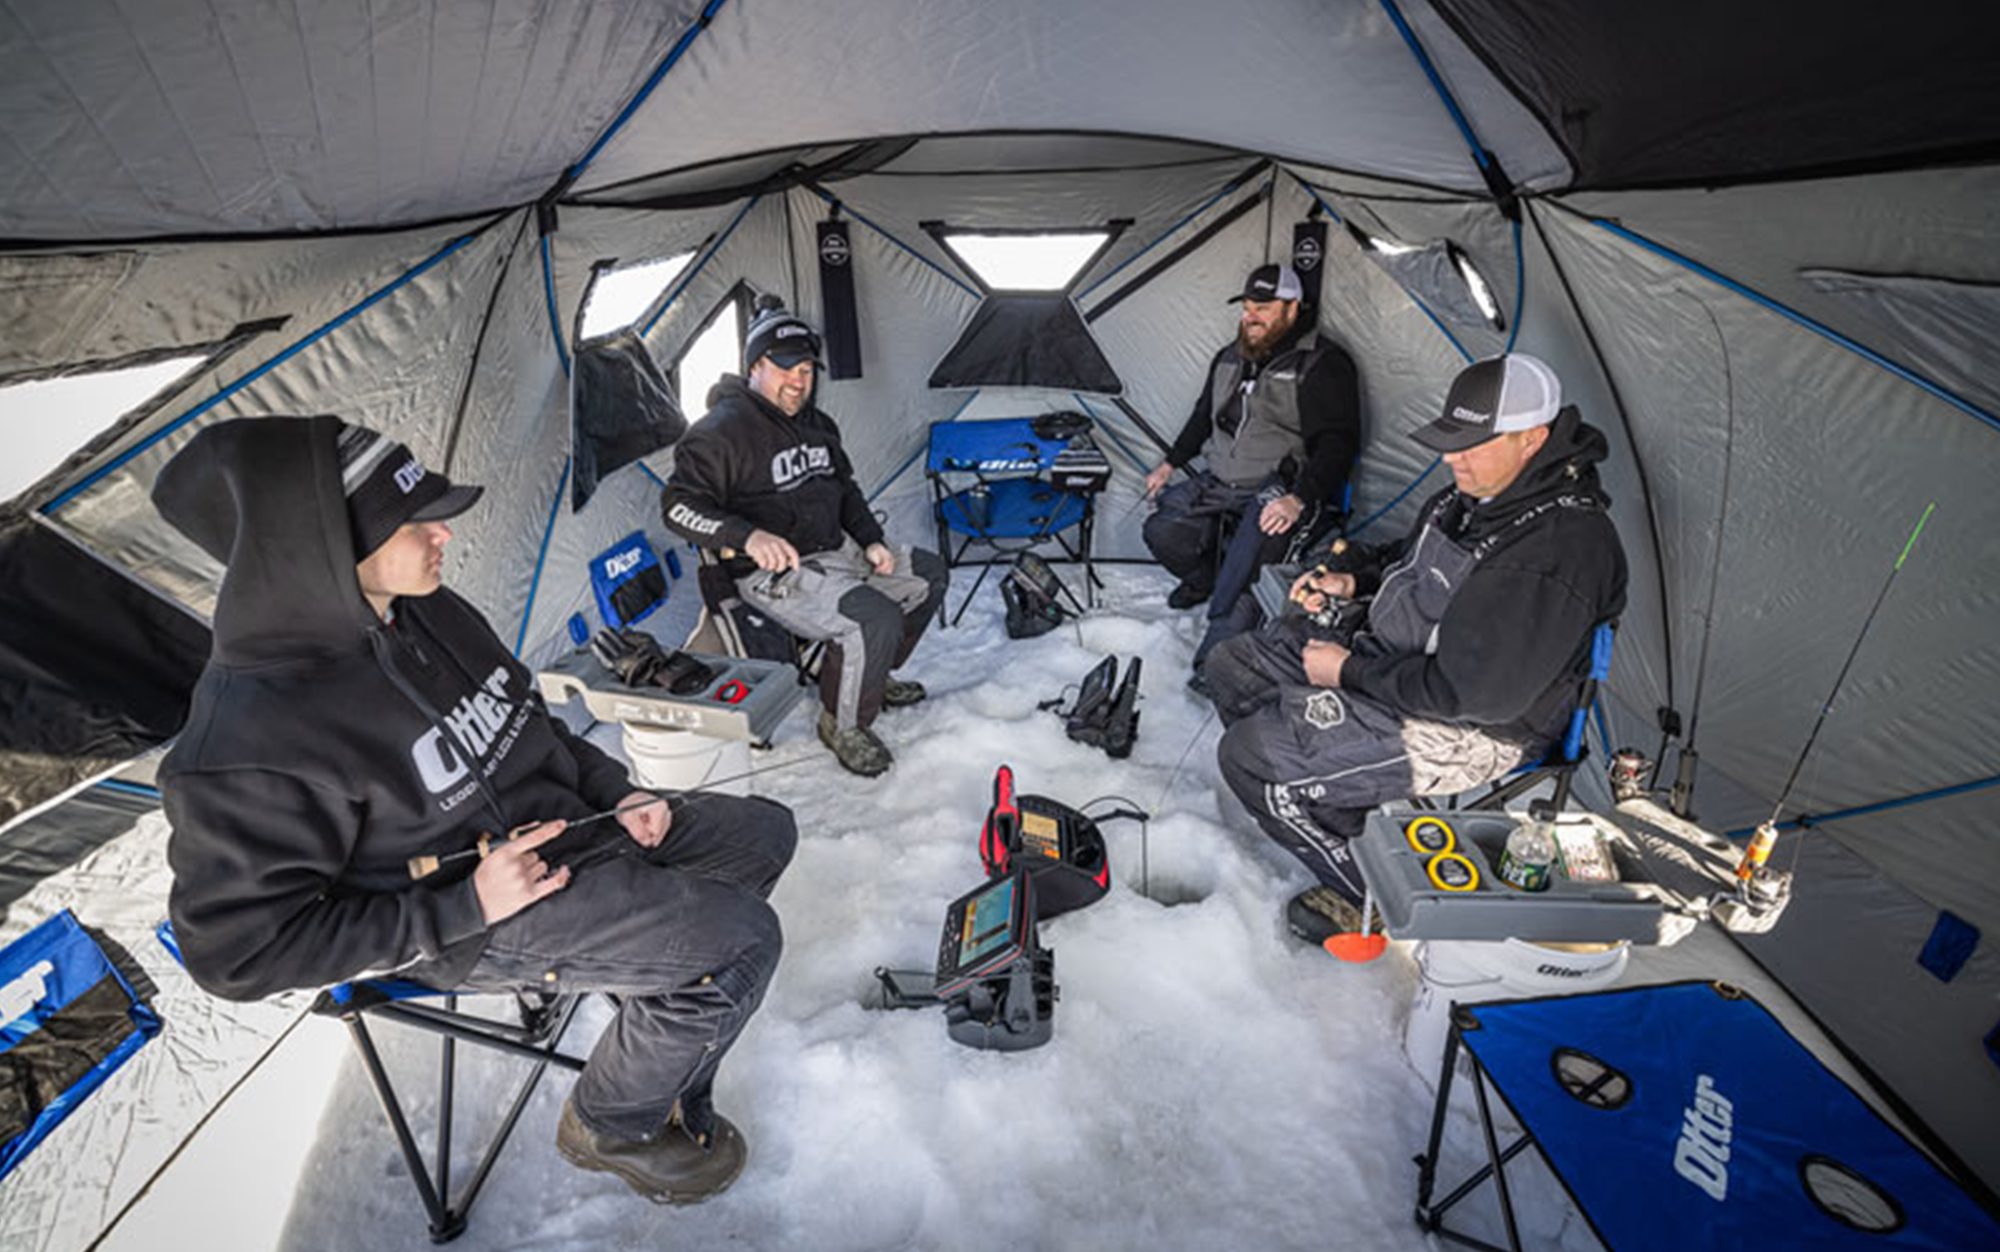 The Otter Outdoors Vortex Pro Monster Lodge has plenty of room for ice camping.